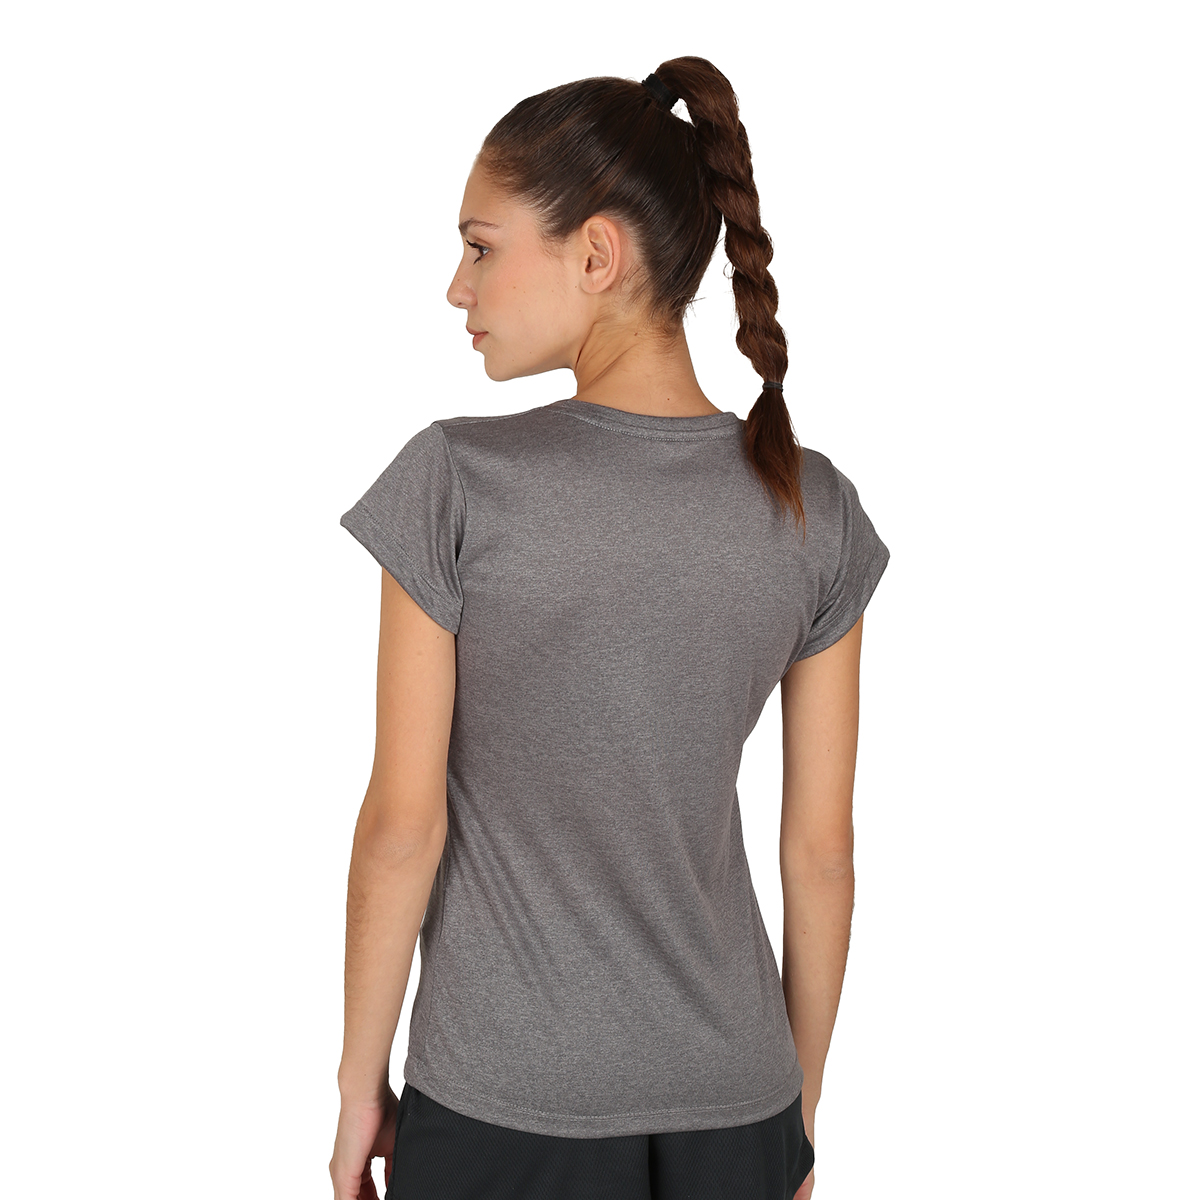 Remera Topper Basic,  image number null